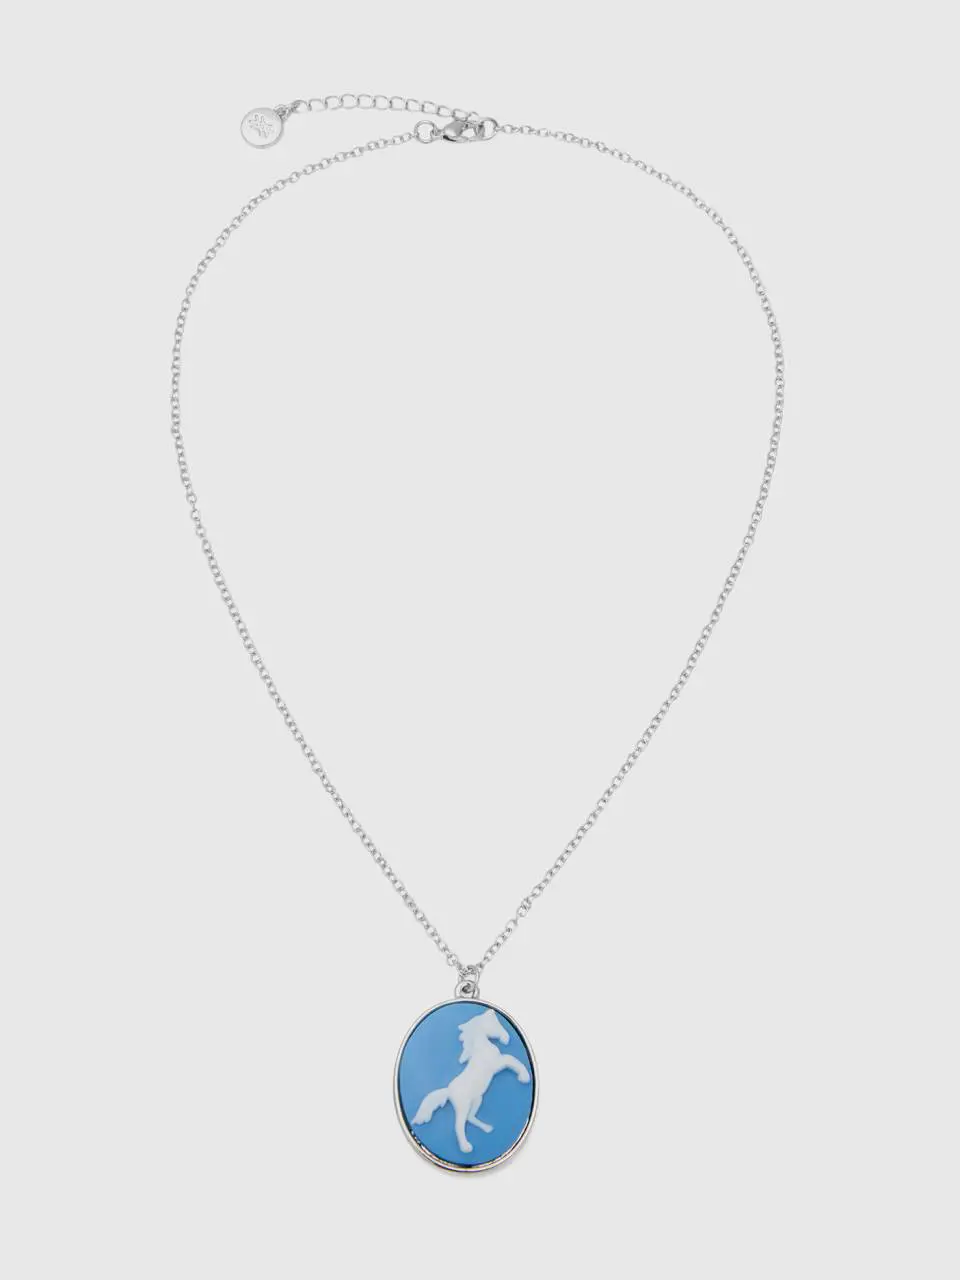 Benetton necklace with light blue horse cameo. 1